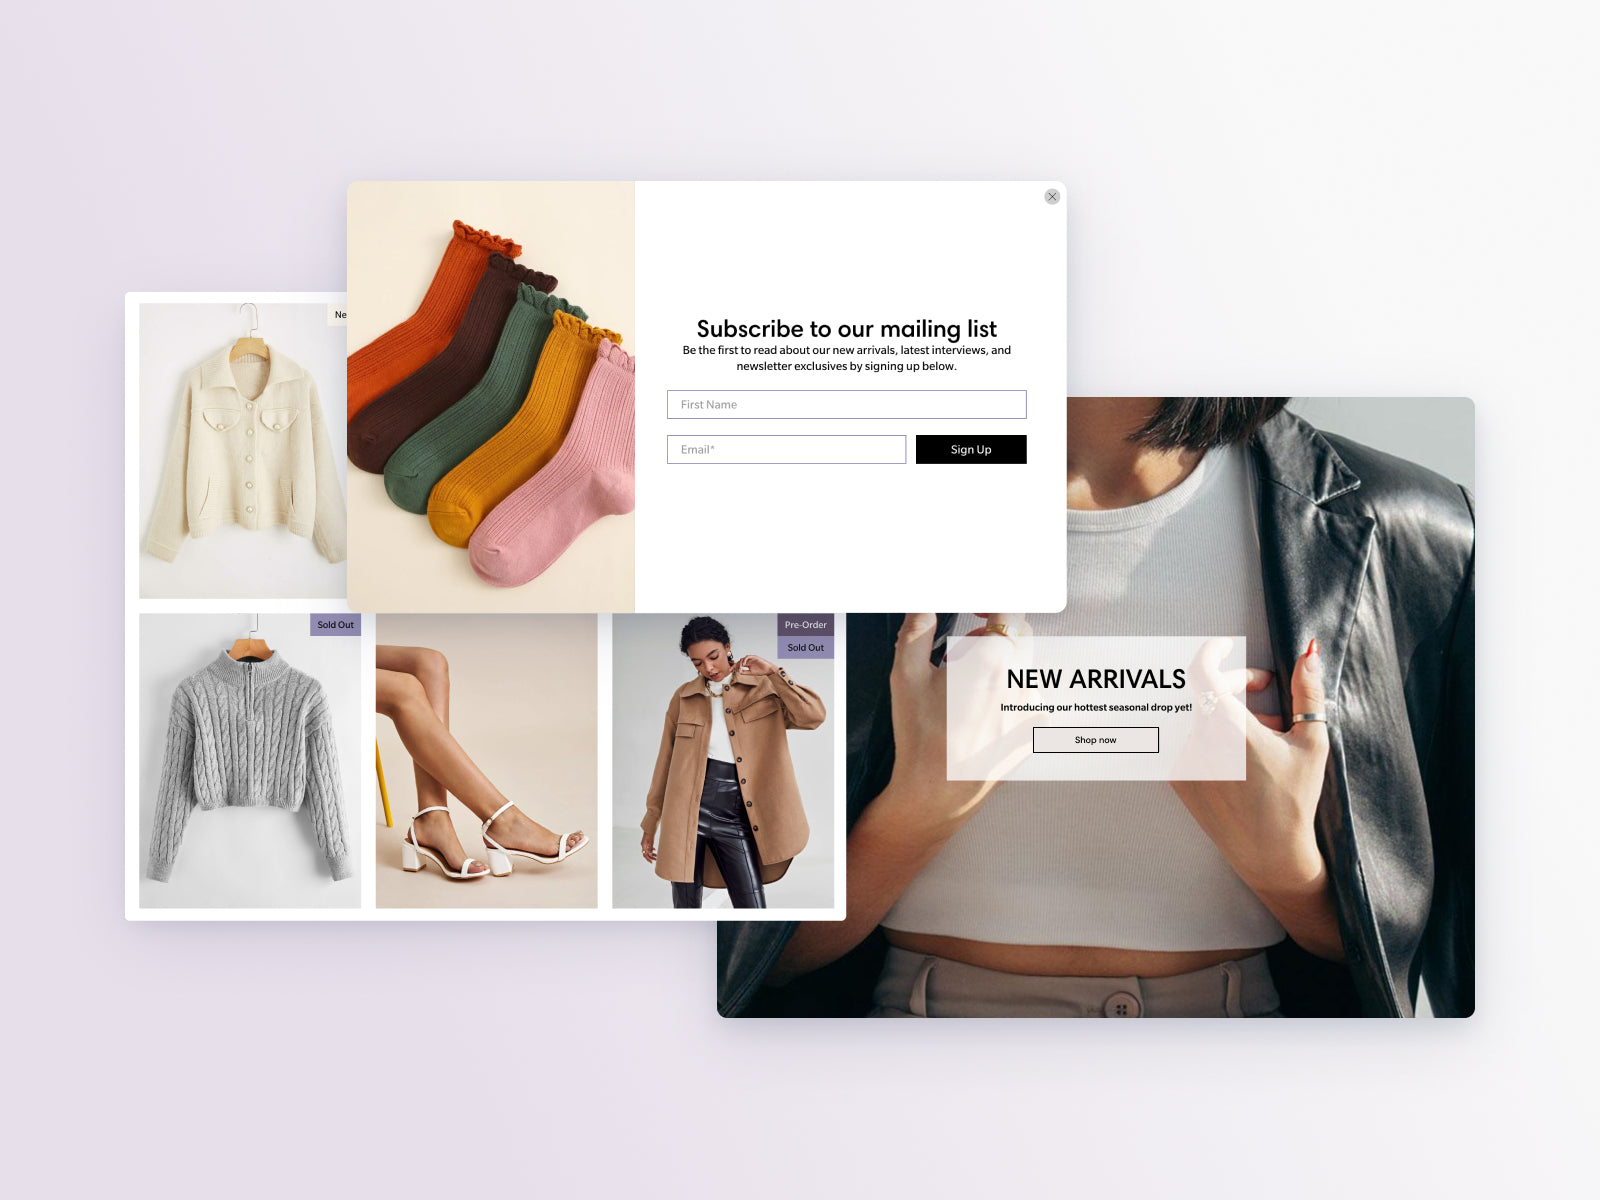 Screenshot of Flex Shopify theme by Out of the Sandbox. Screenshot includes a collage of 3 images. Left: Product grid of white jacket, grey sweater, white heels, and brown jacket. Center: Newsletter popup signup form with image of 4 multi-colored socks. Right: Woman wearing leather jacket and white tank top with "New Arrivals" text.